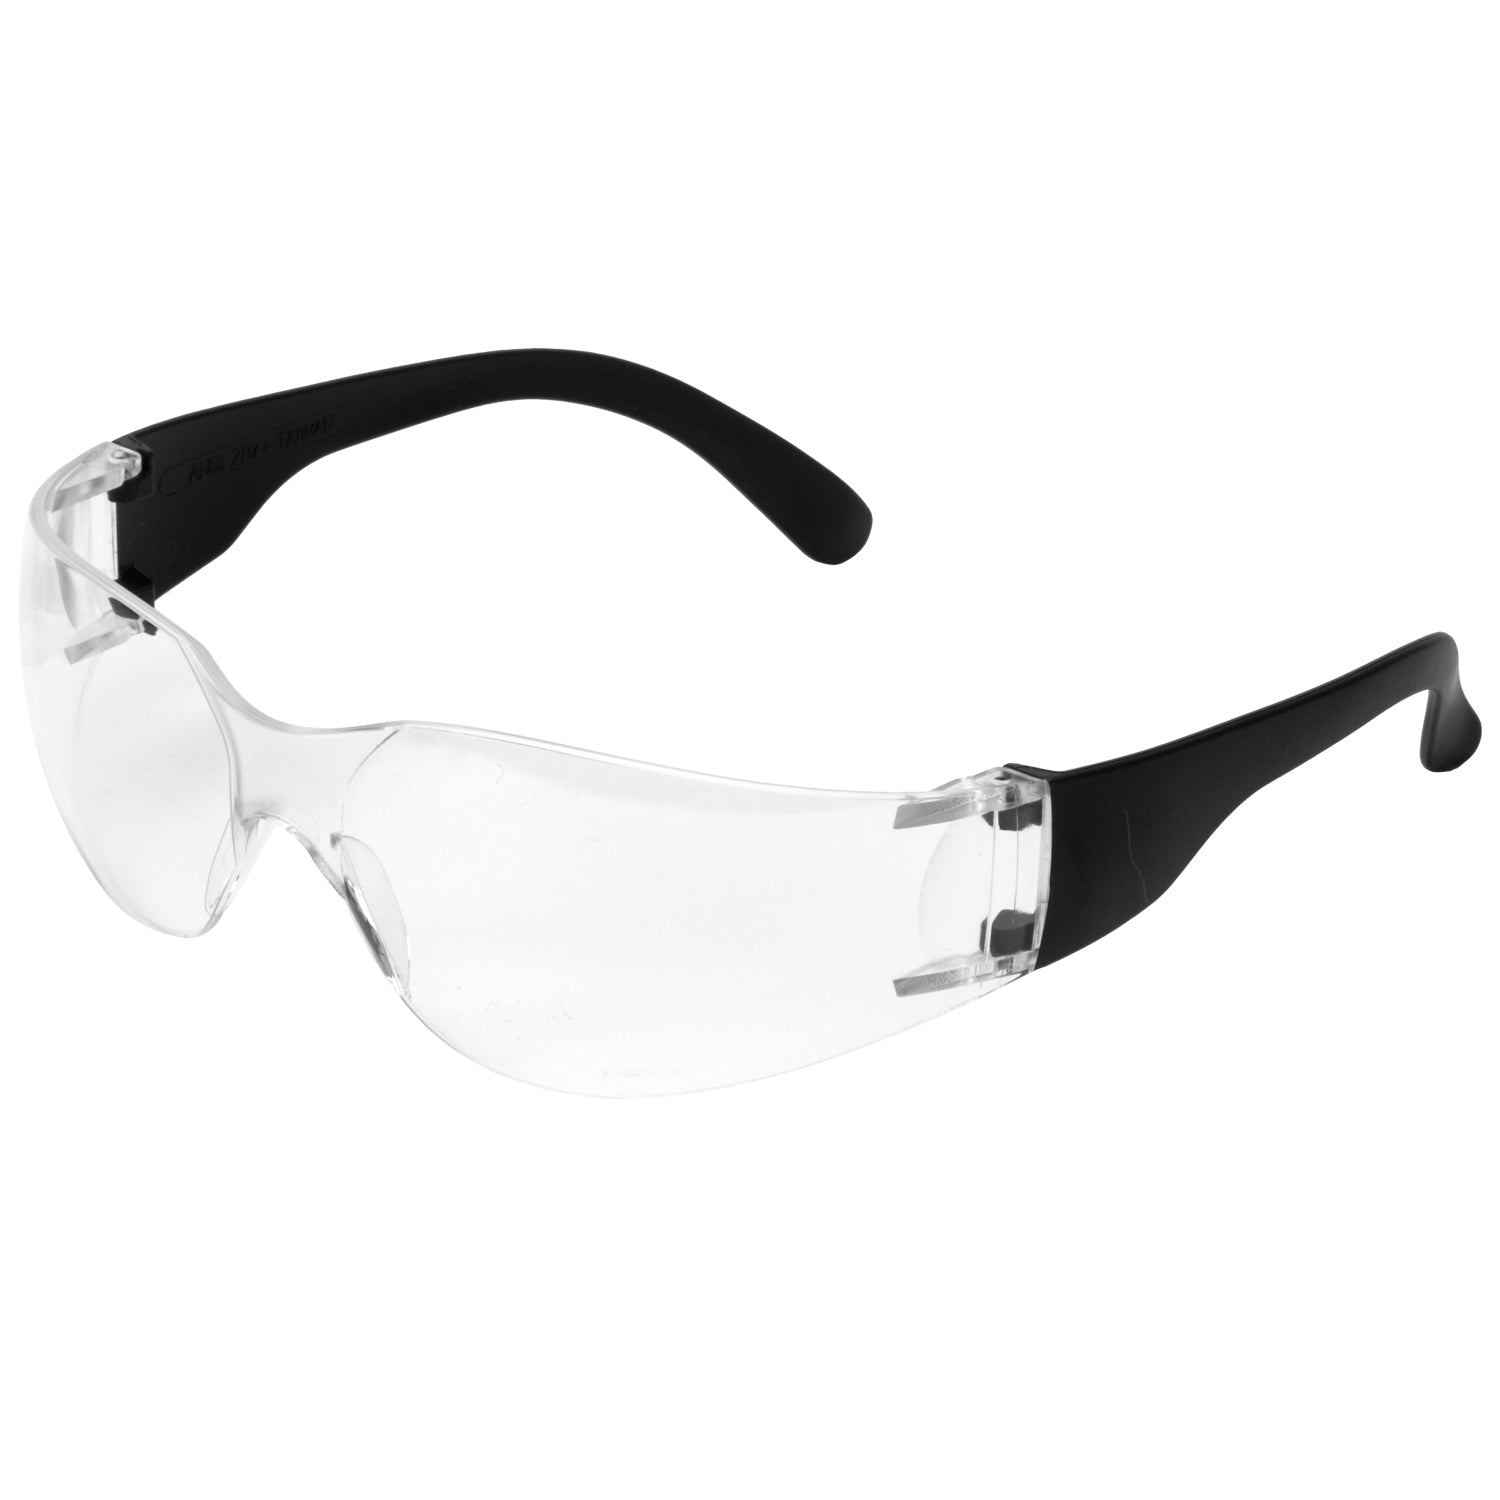 Supertouch E10 Safety Glasses